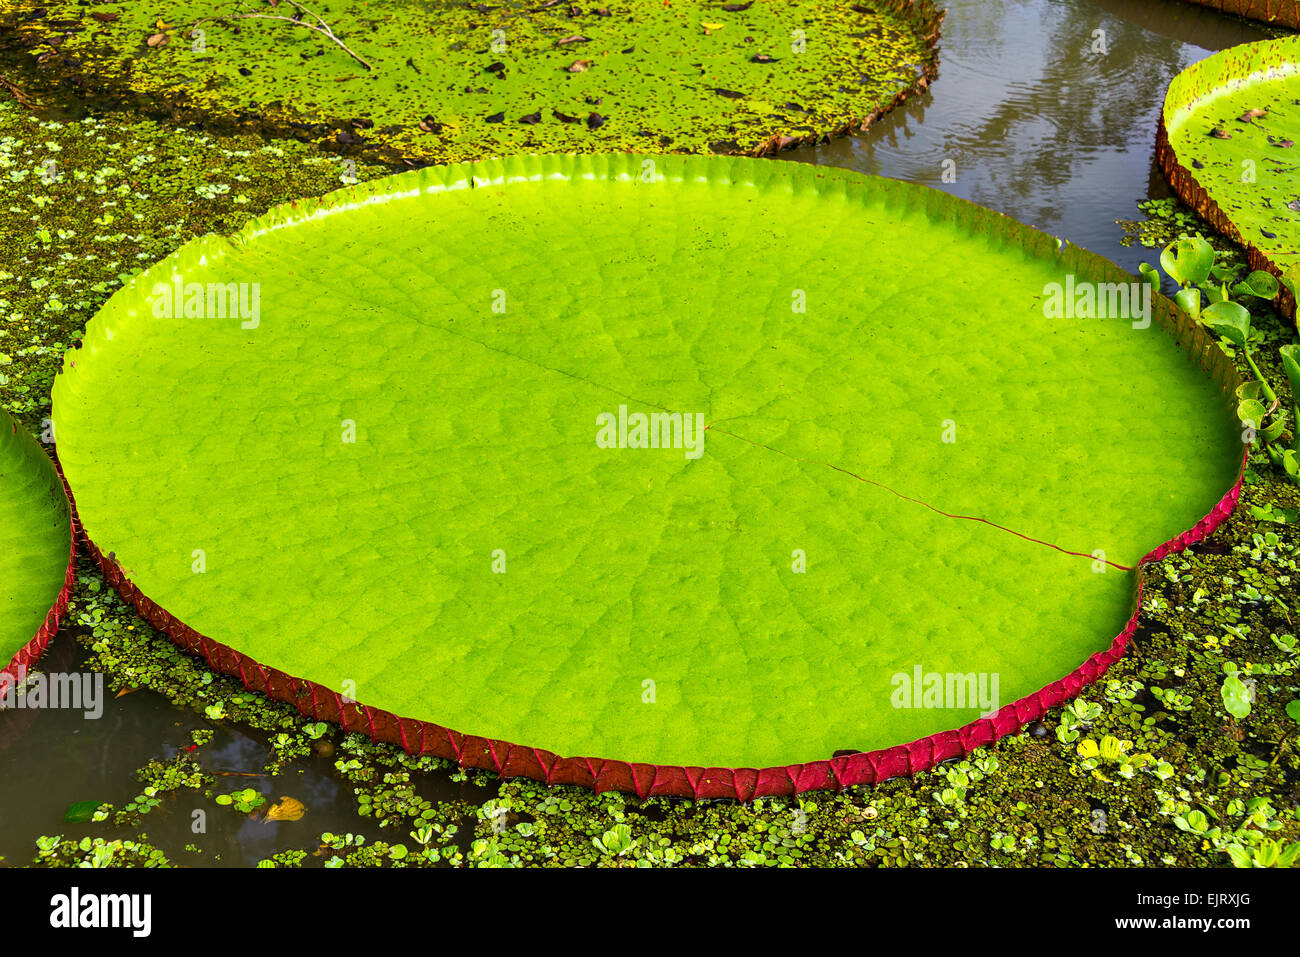 Leaf of a Victoria Amazonica or Victoria Regia, the largest aquatic plant in the world in the Amazon Rainforest in Peru Stock Photo